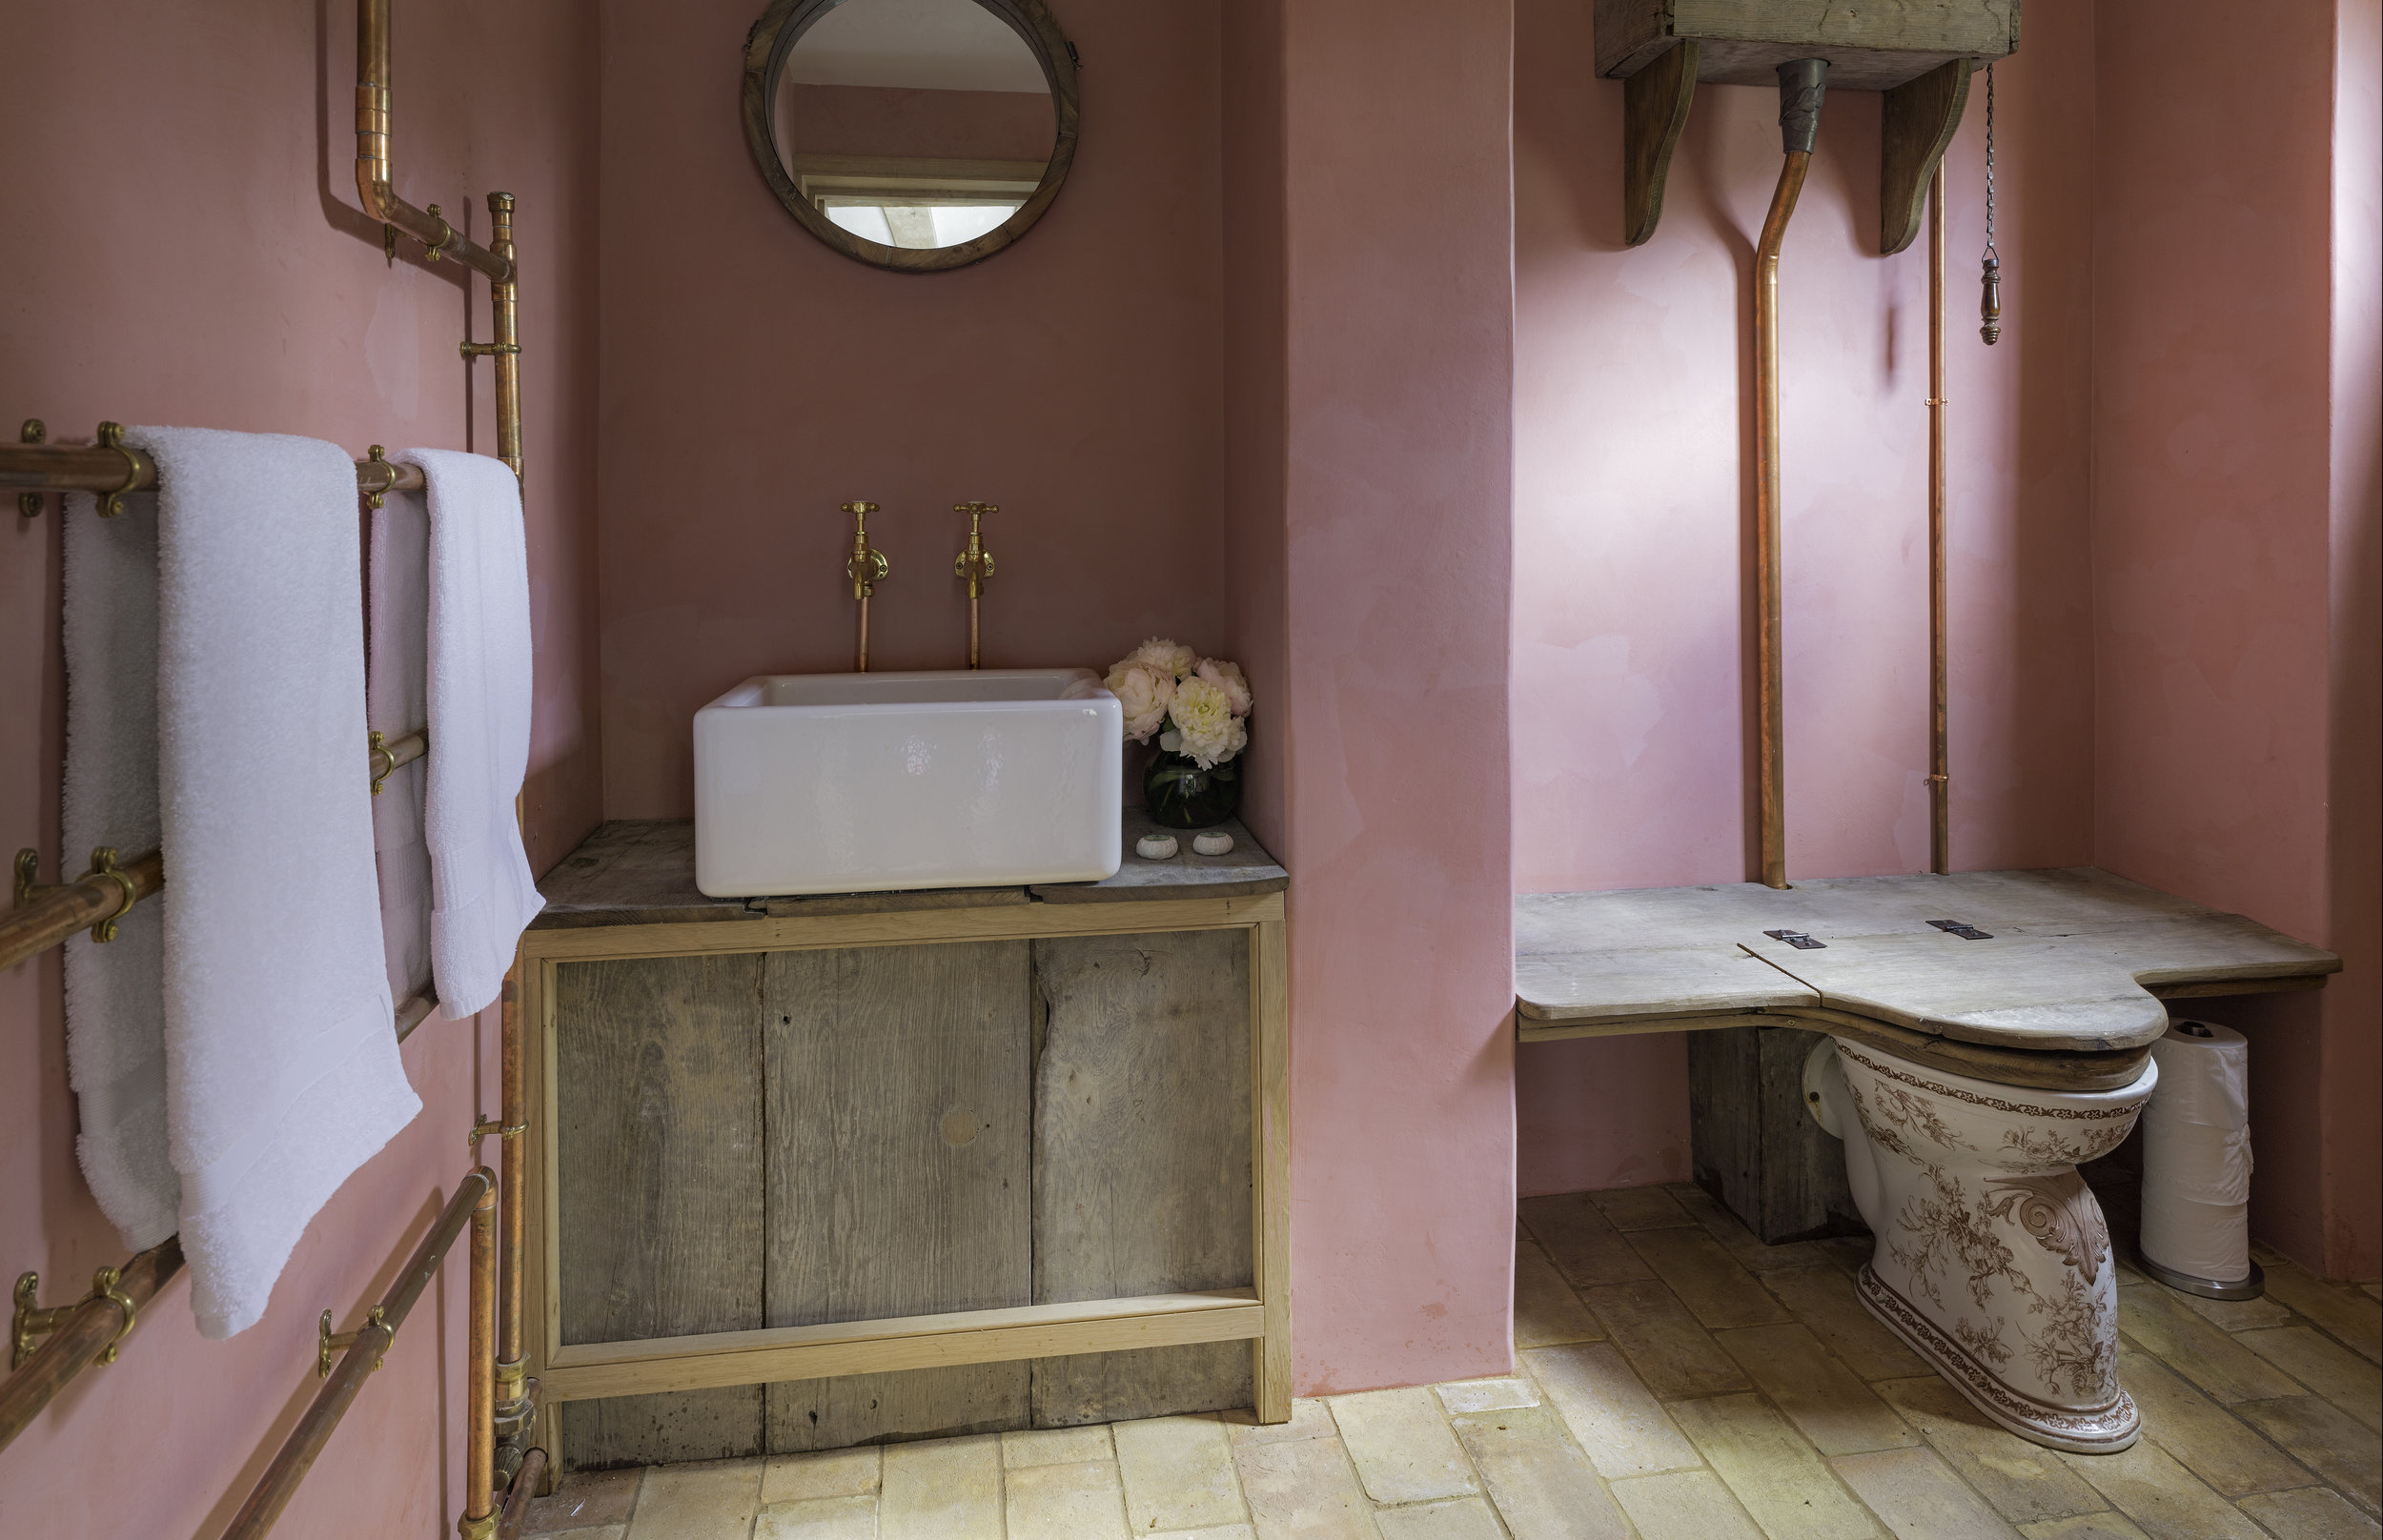 Pink, weathered wood and copper pipes combine in the Farmhouse bathroom